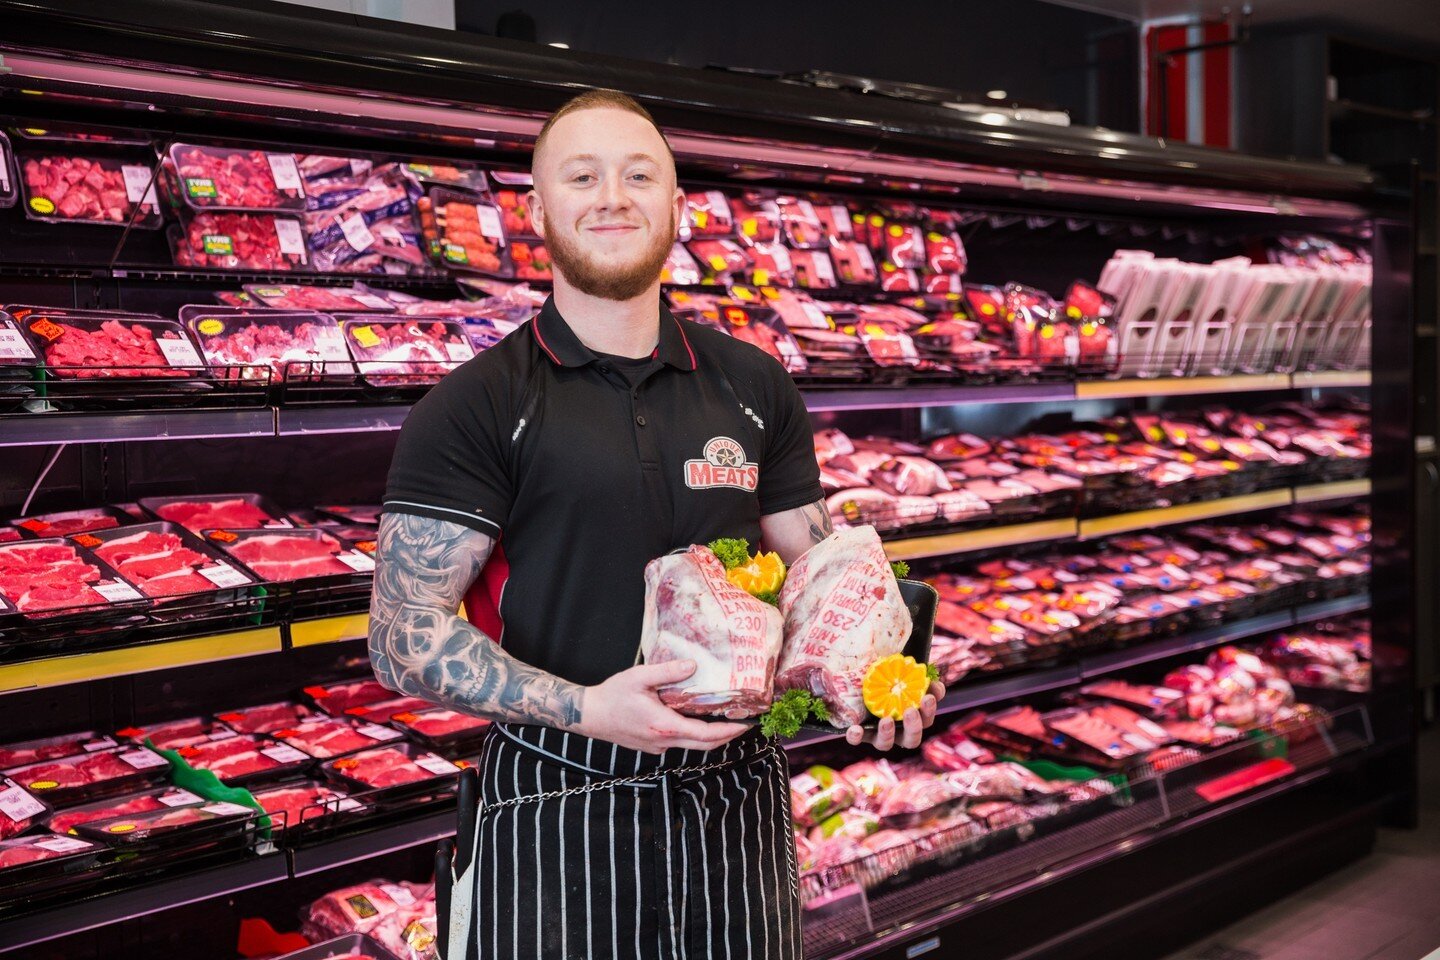 Easter Sunday BBQs sorted! 🥩 

Stop into Unique Meats this weekend for a BBQ spread like no other. Their friendly staff provide excellent advice on serving suggestions, and quality cuts the whole family will enjoy. 

EASTER TRADING HOURS⁠

OPEN:
Wed